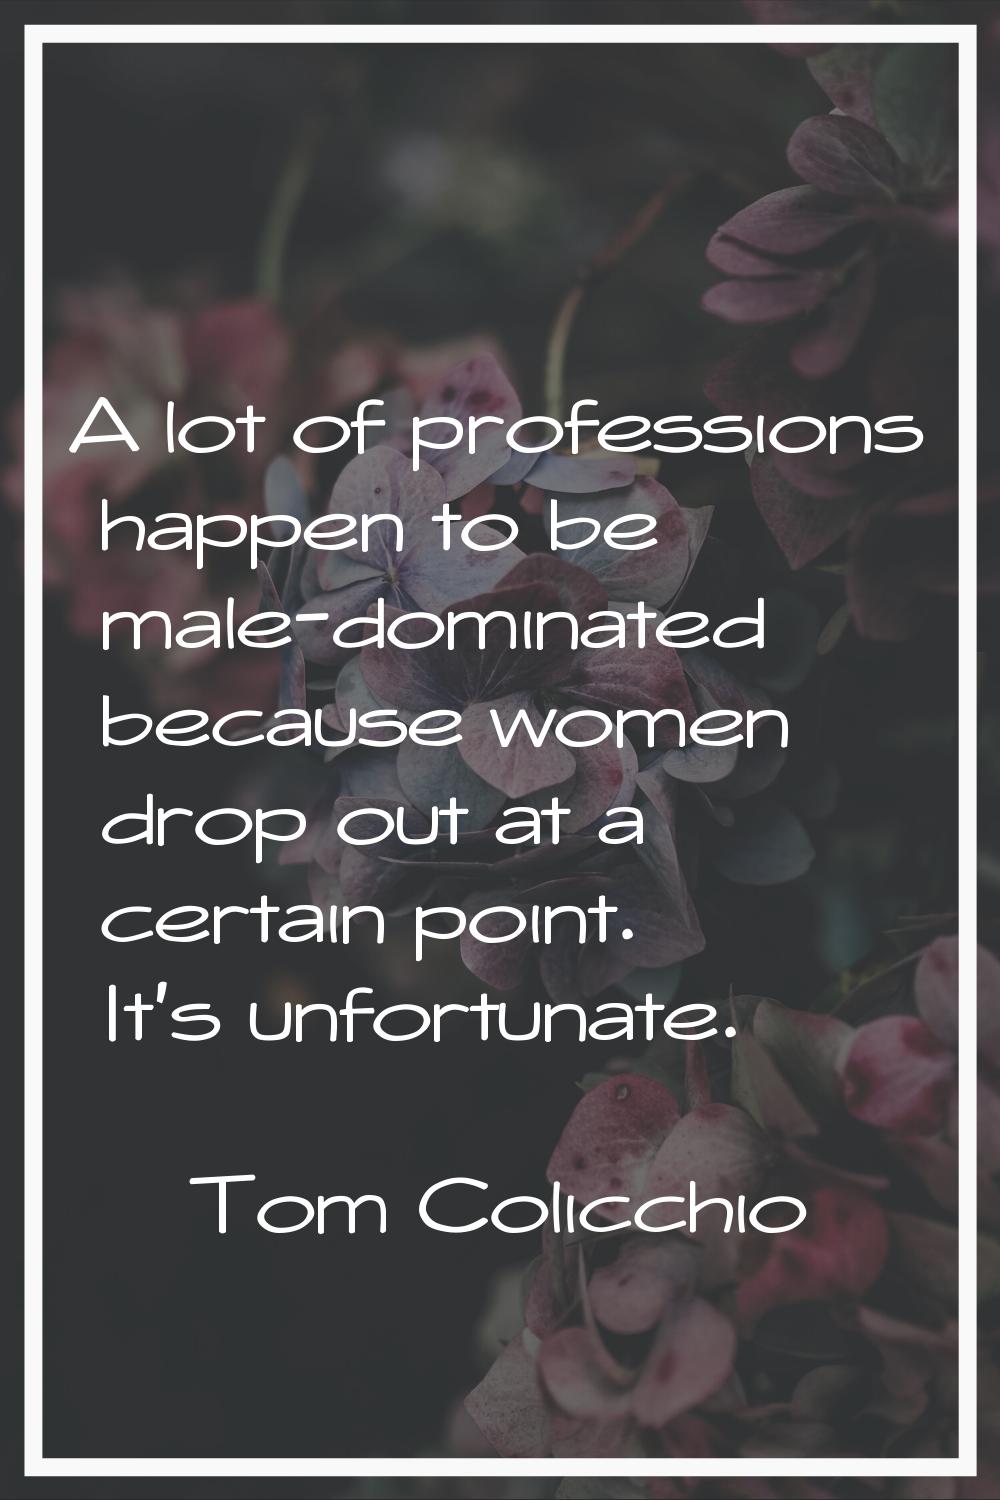 A lot of professions happen to be male-dominated because women drop out at a certain point. It's un